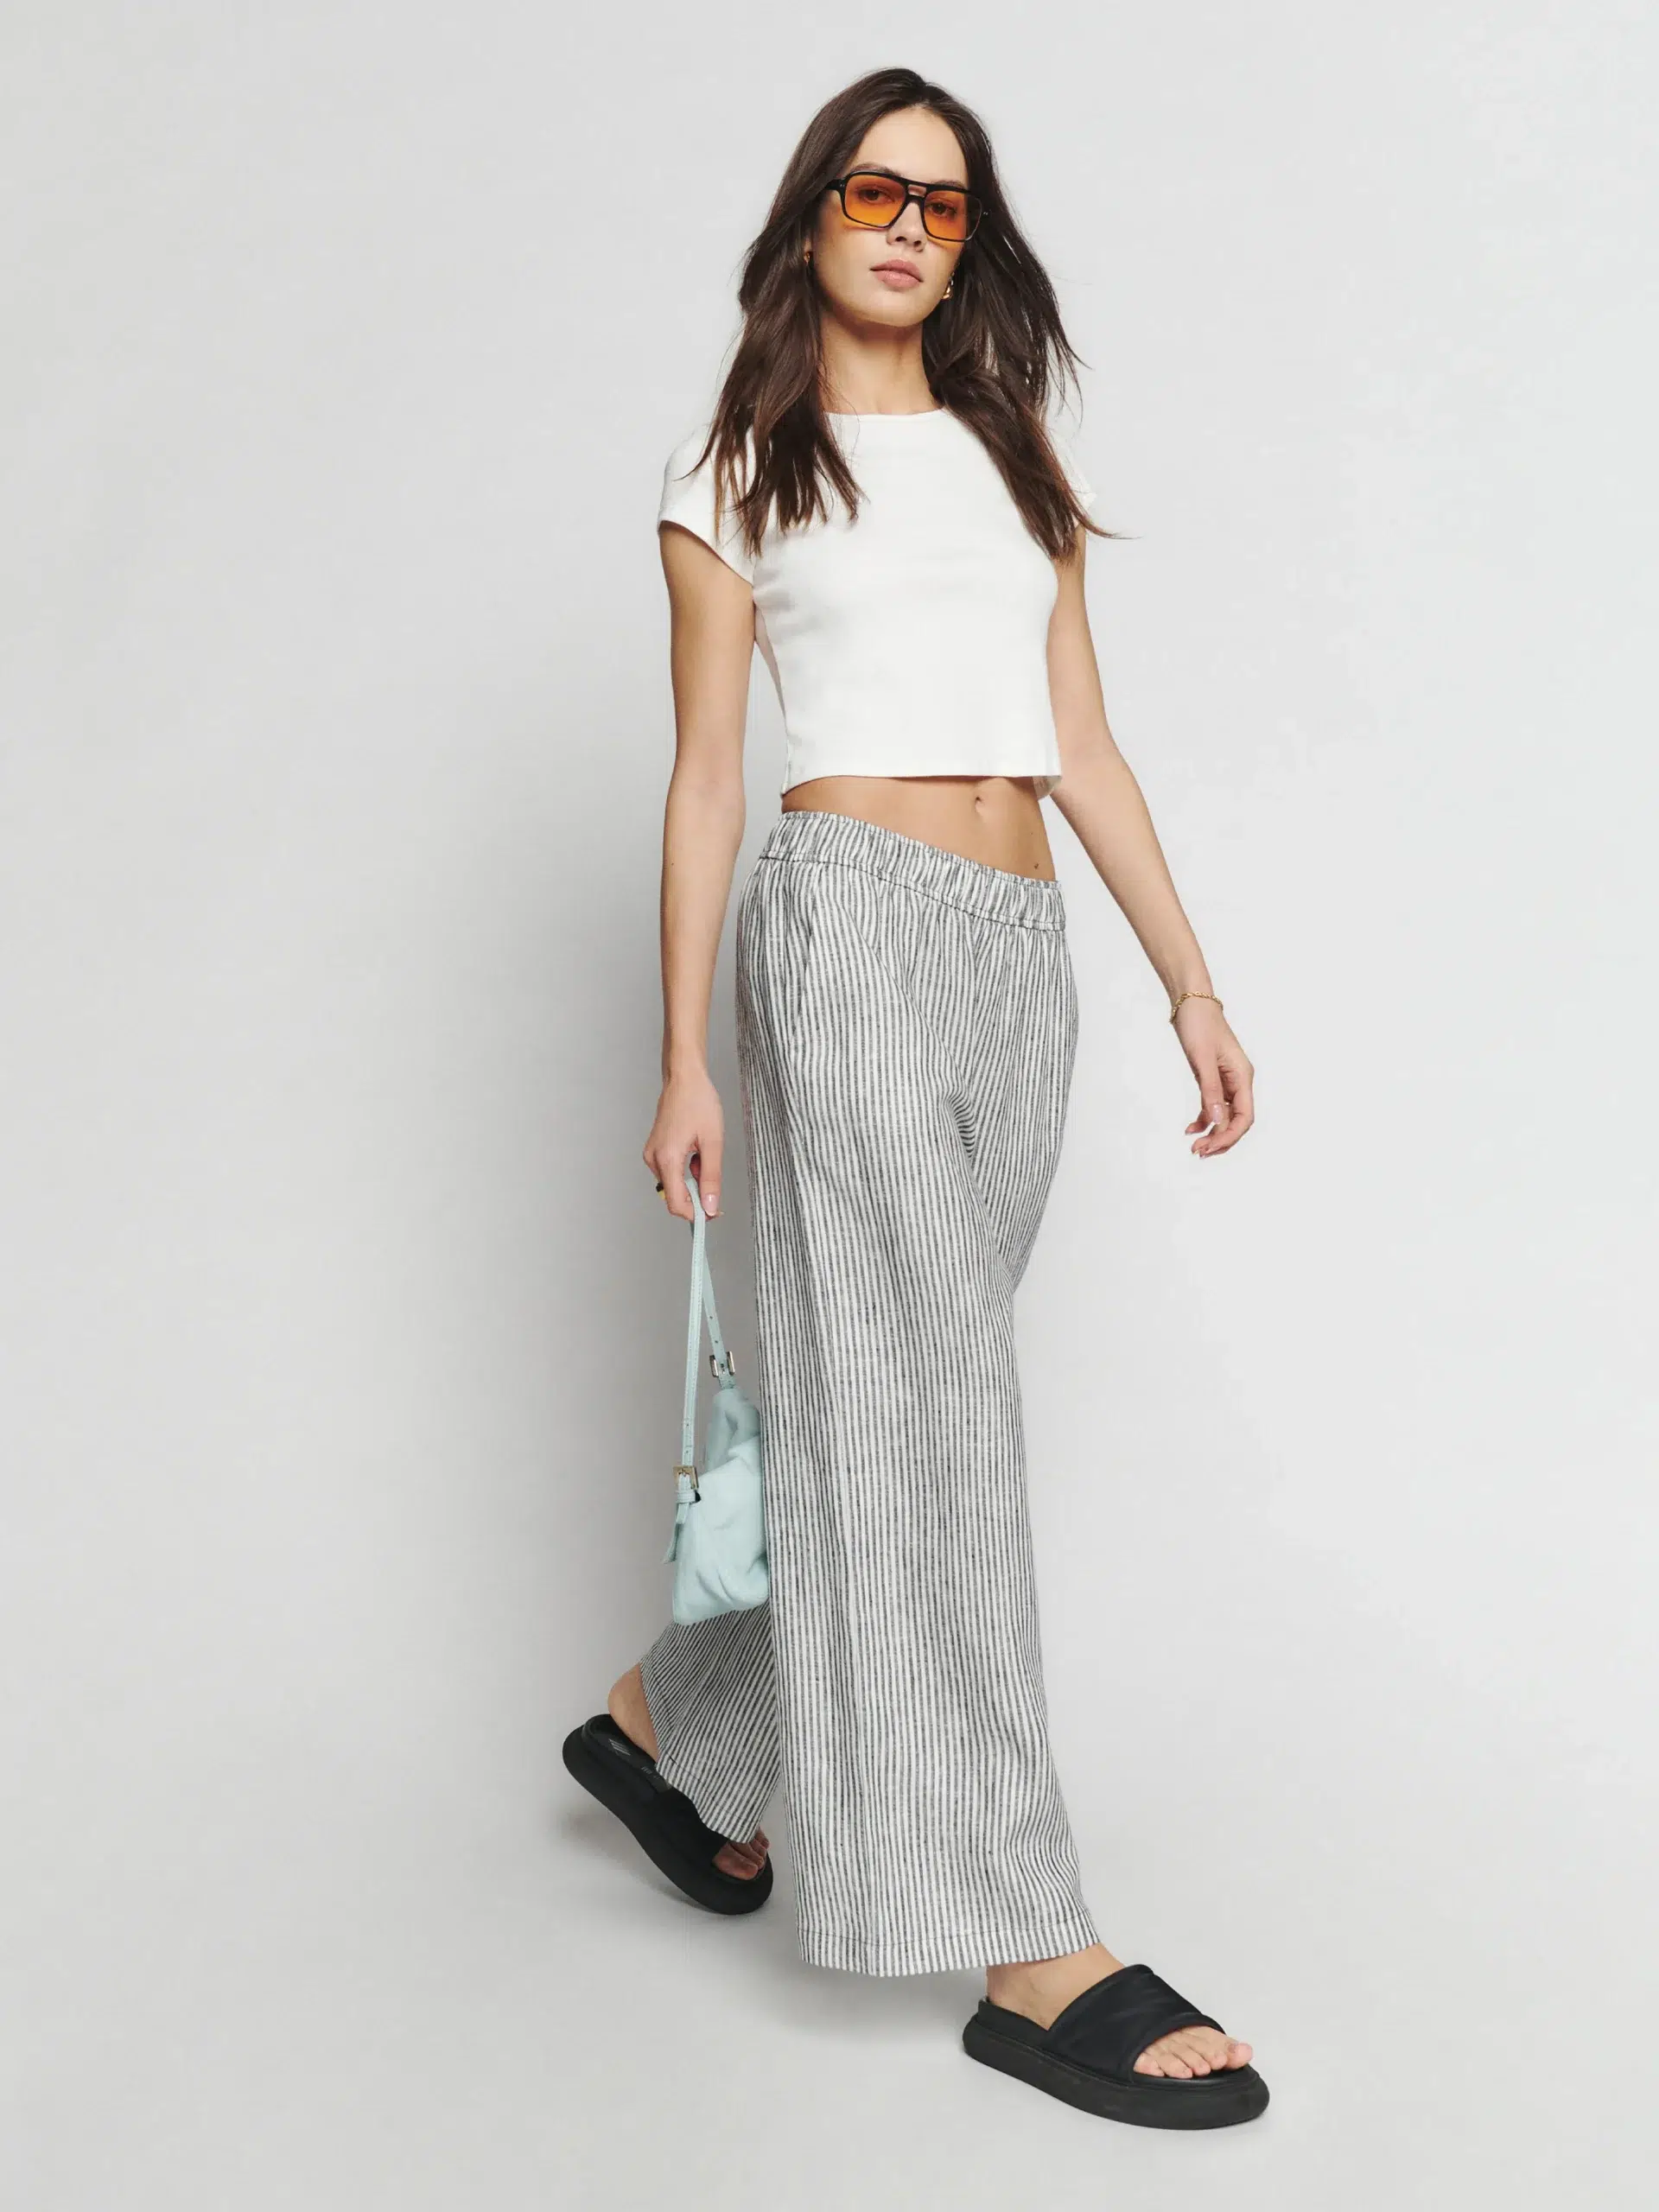 A petite model in a white crop and wide leg pin striped pants.